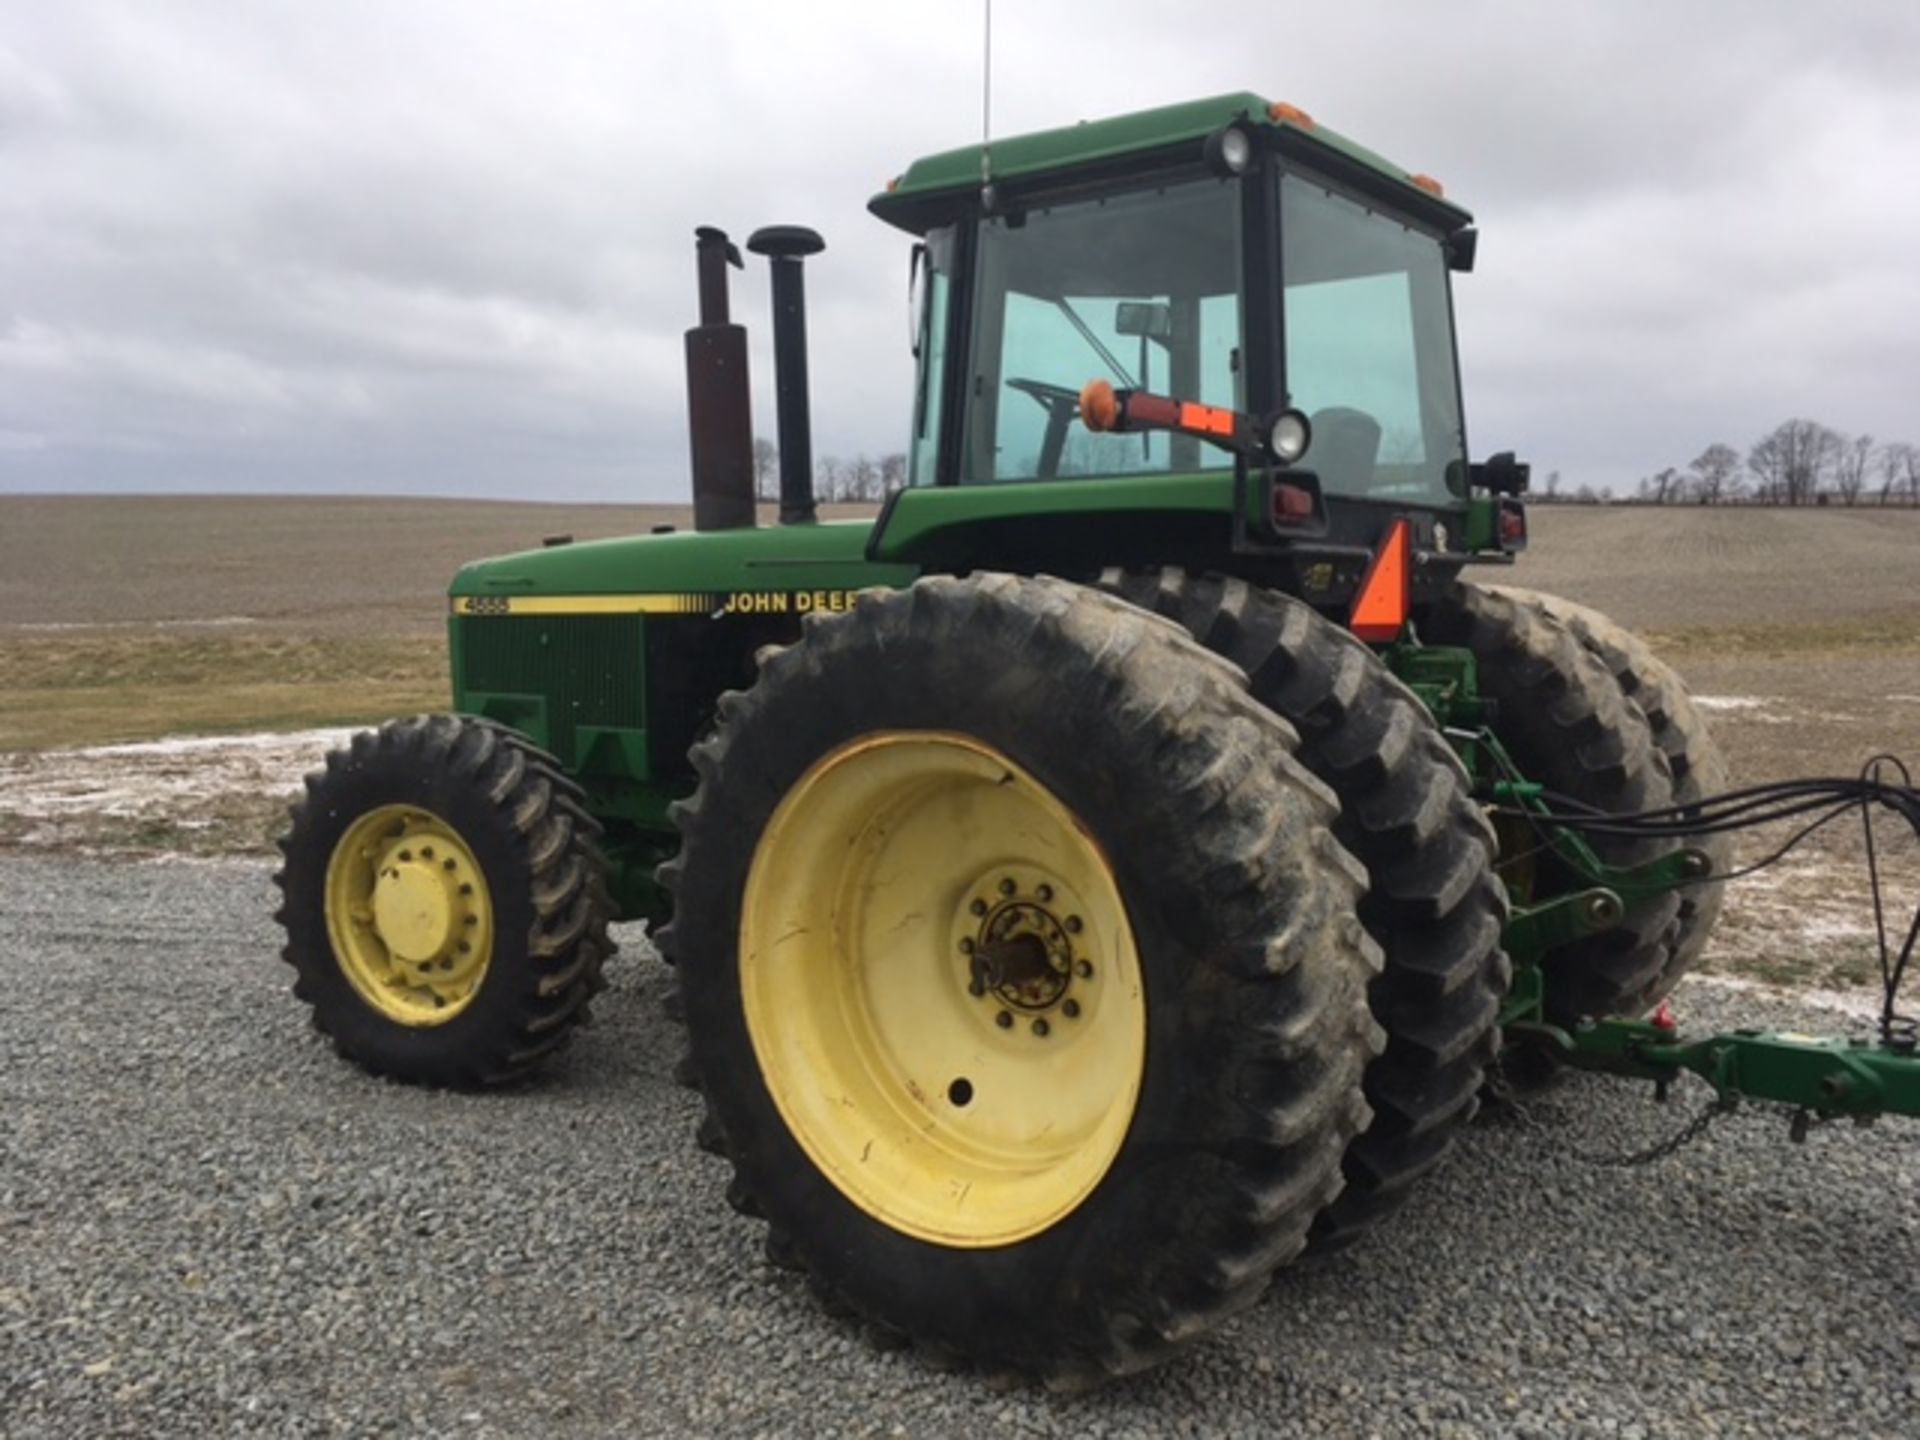 John Deere 4555 Tractor, MFWD, weights, duals, 15 speed powershift, 3pt., 3 hyd. remotes, big 1000 - Image 5 of 13